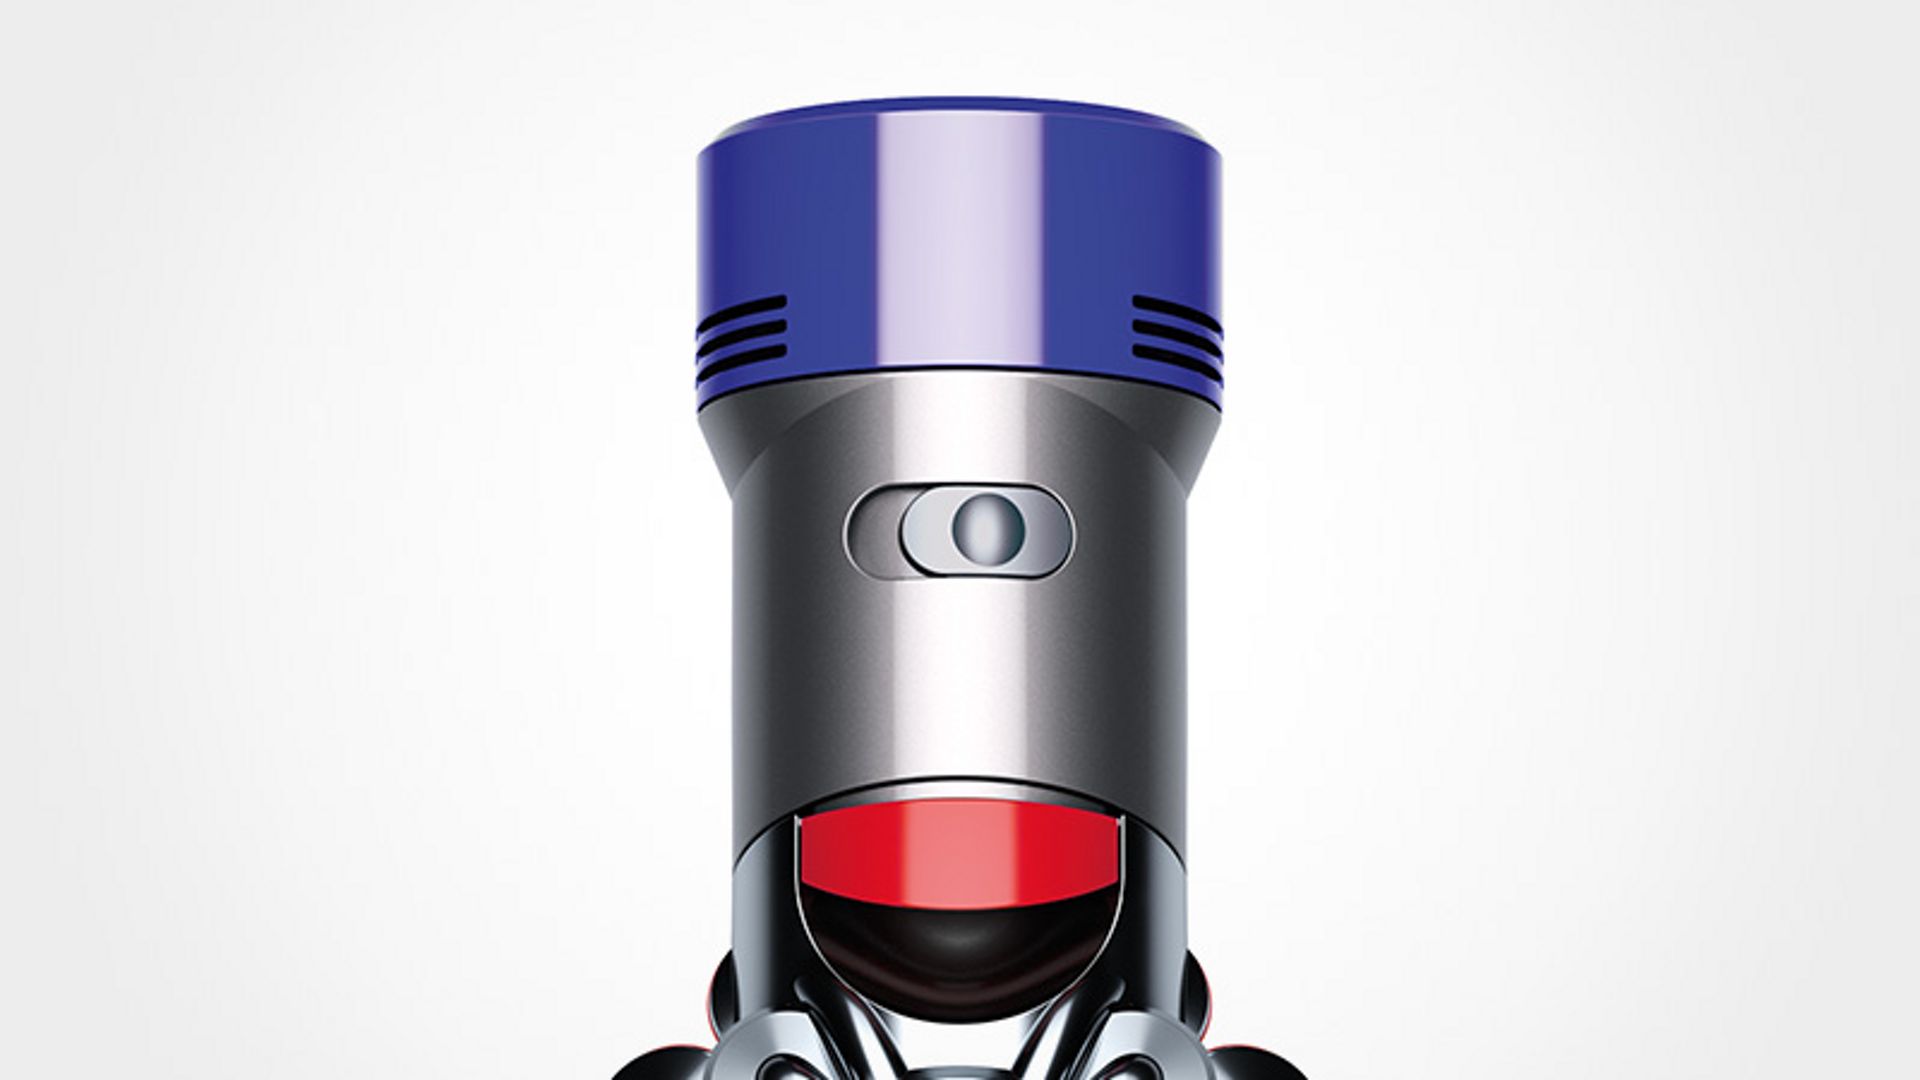 Close-up of Dyson V8 Absolute vacuum power mode switch